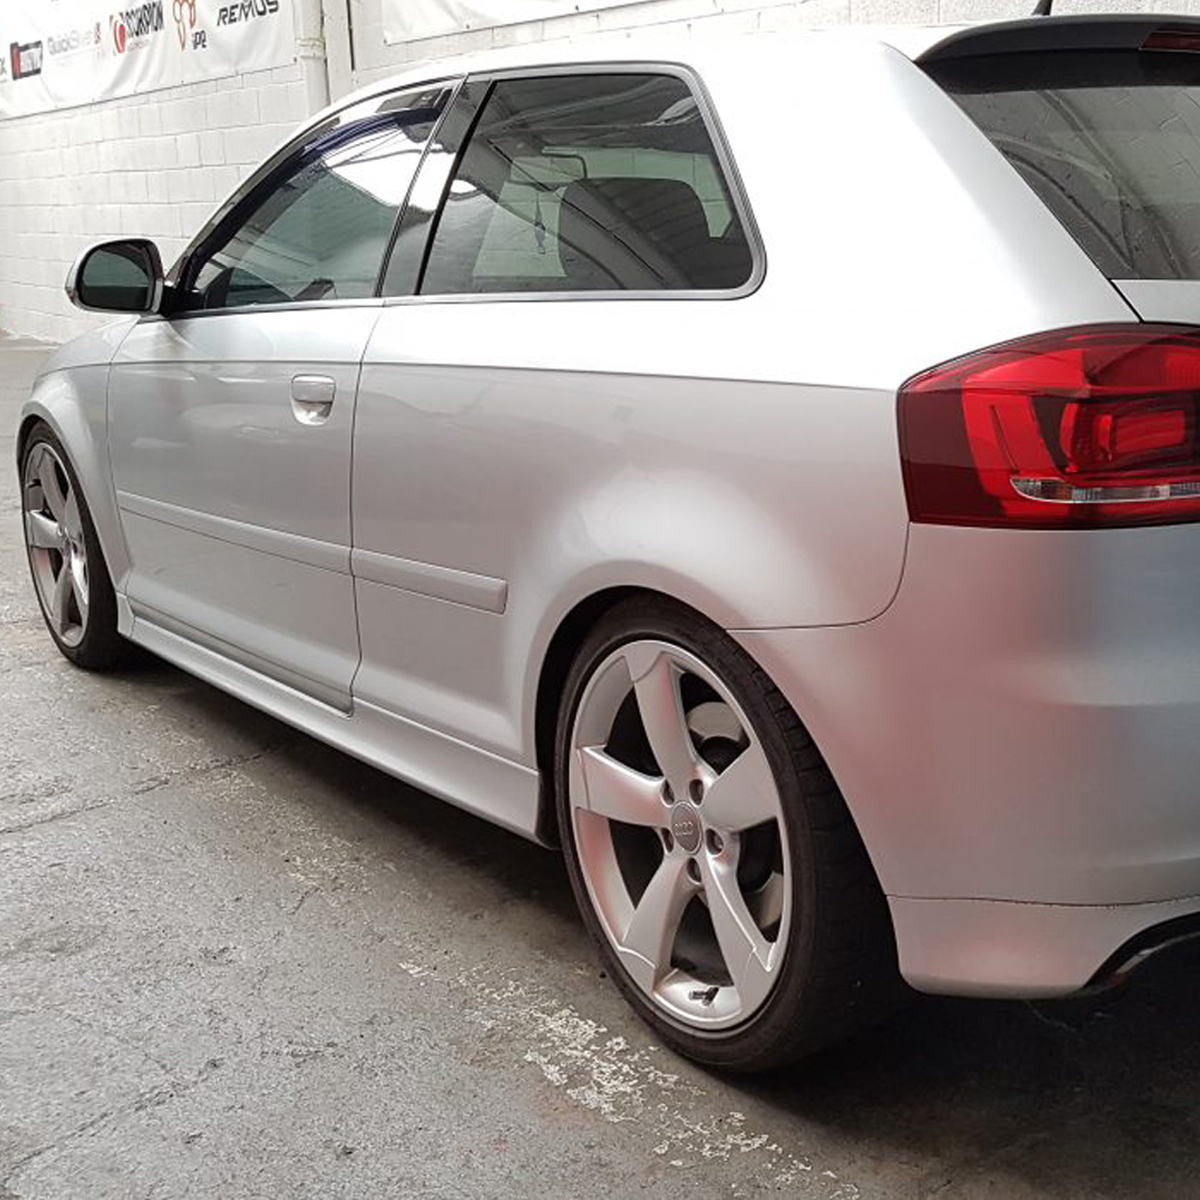 Side Skirts Audi A3 8P 2/3 doors #010530 – Marvel Tuning